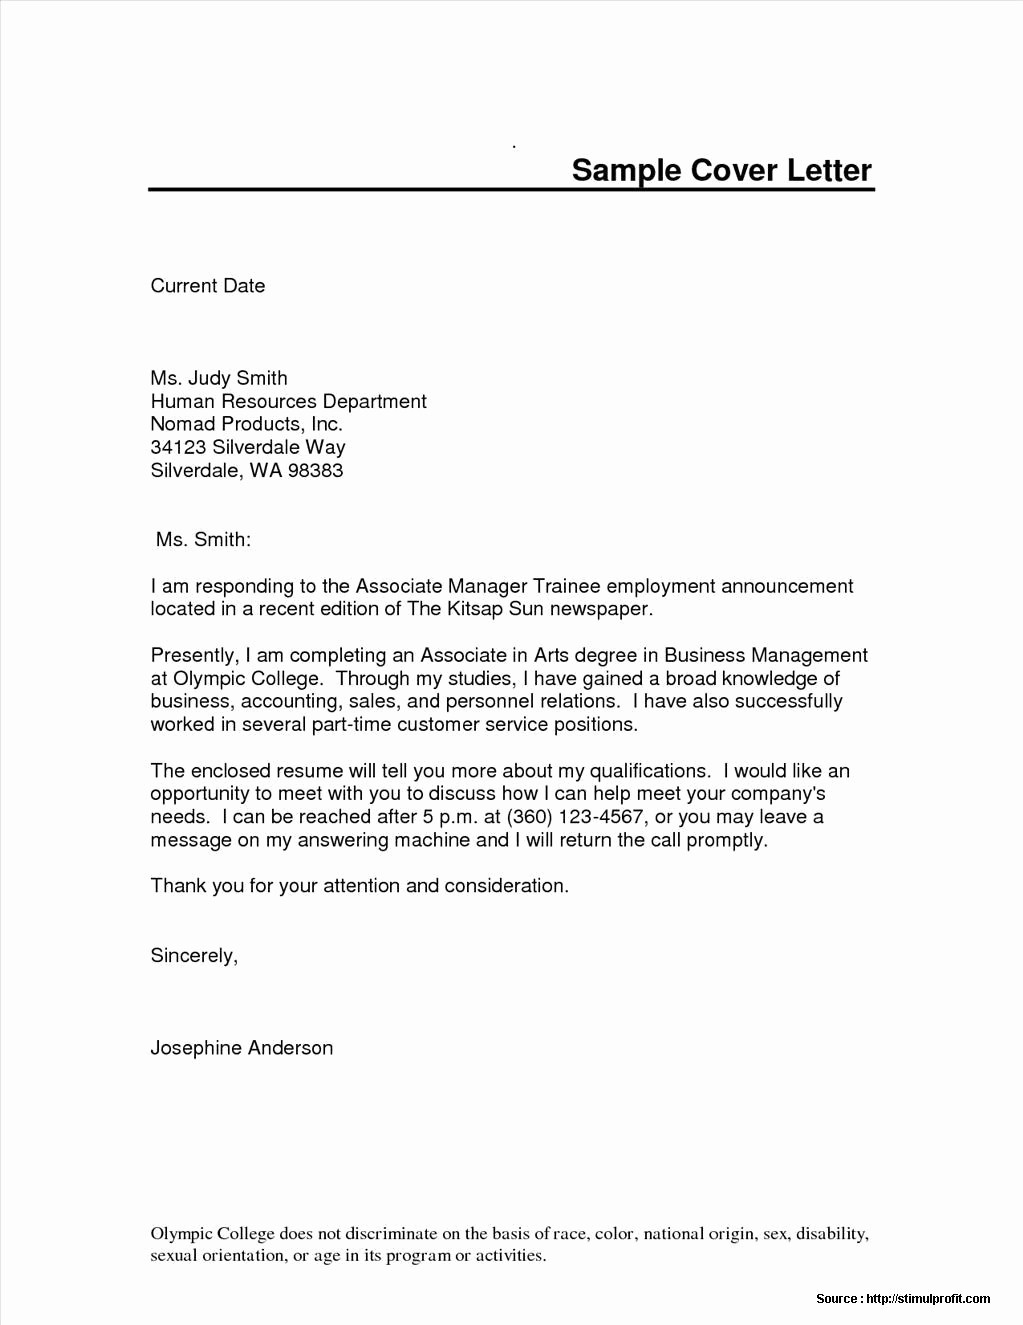 Cover Letter with Picture Template Fresh Free Cover Letter Template Word 2010 Cover Letter